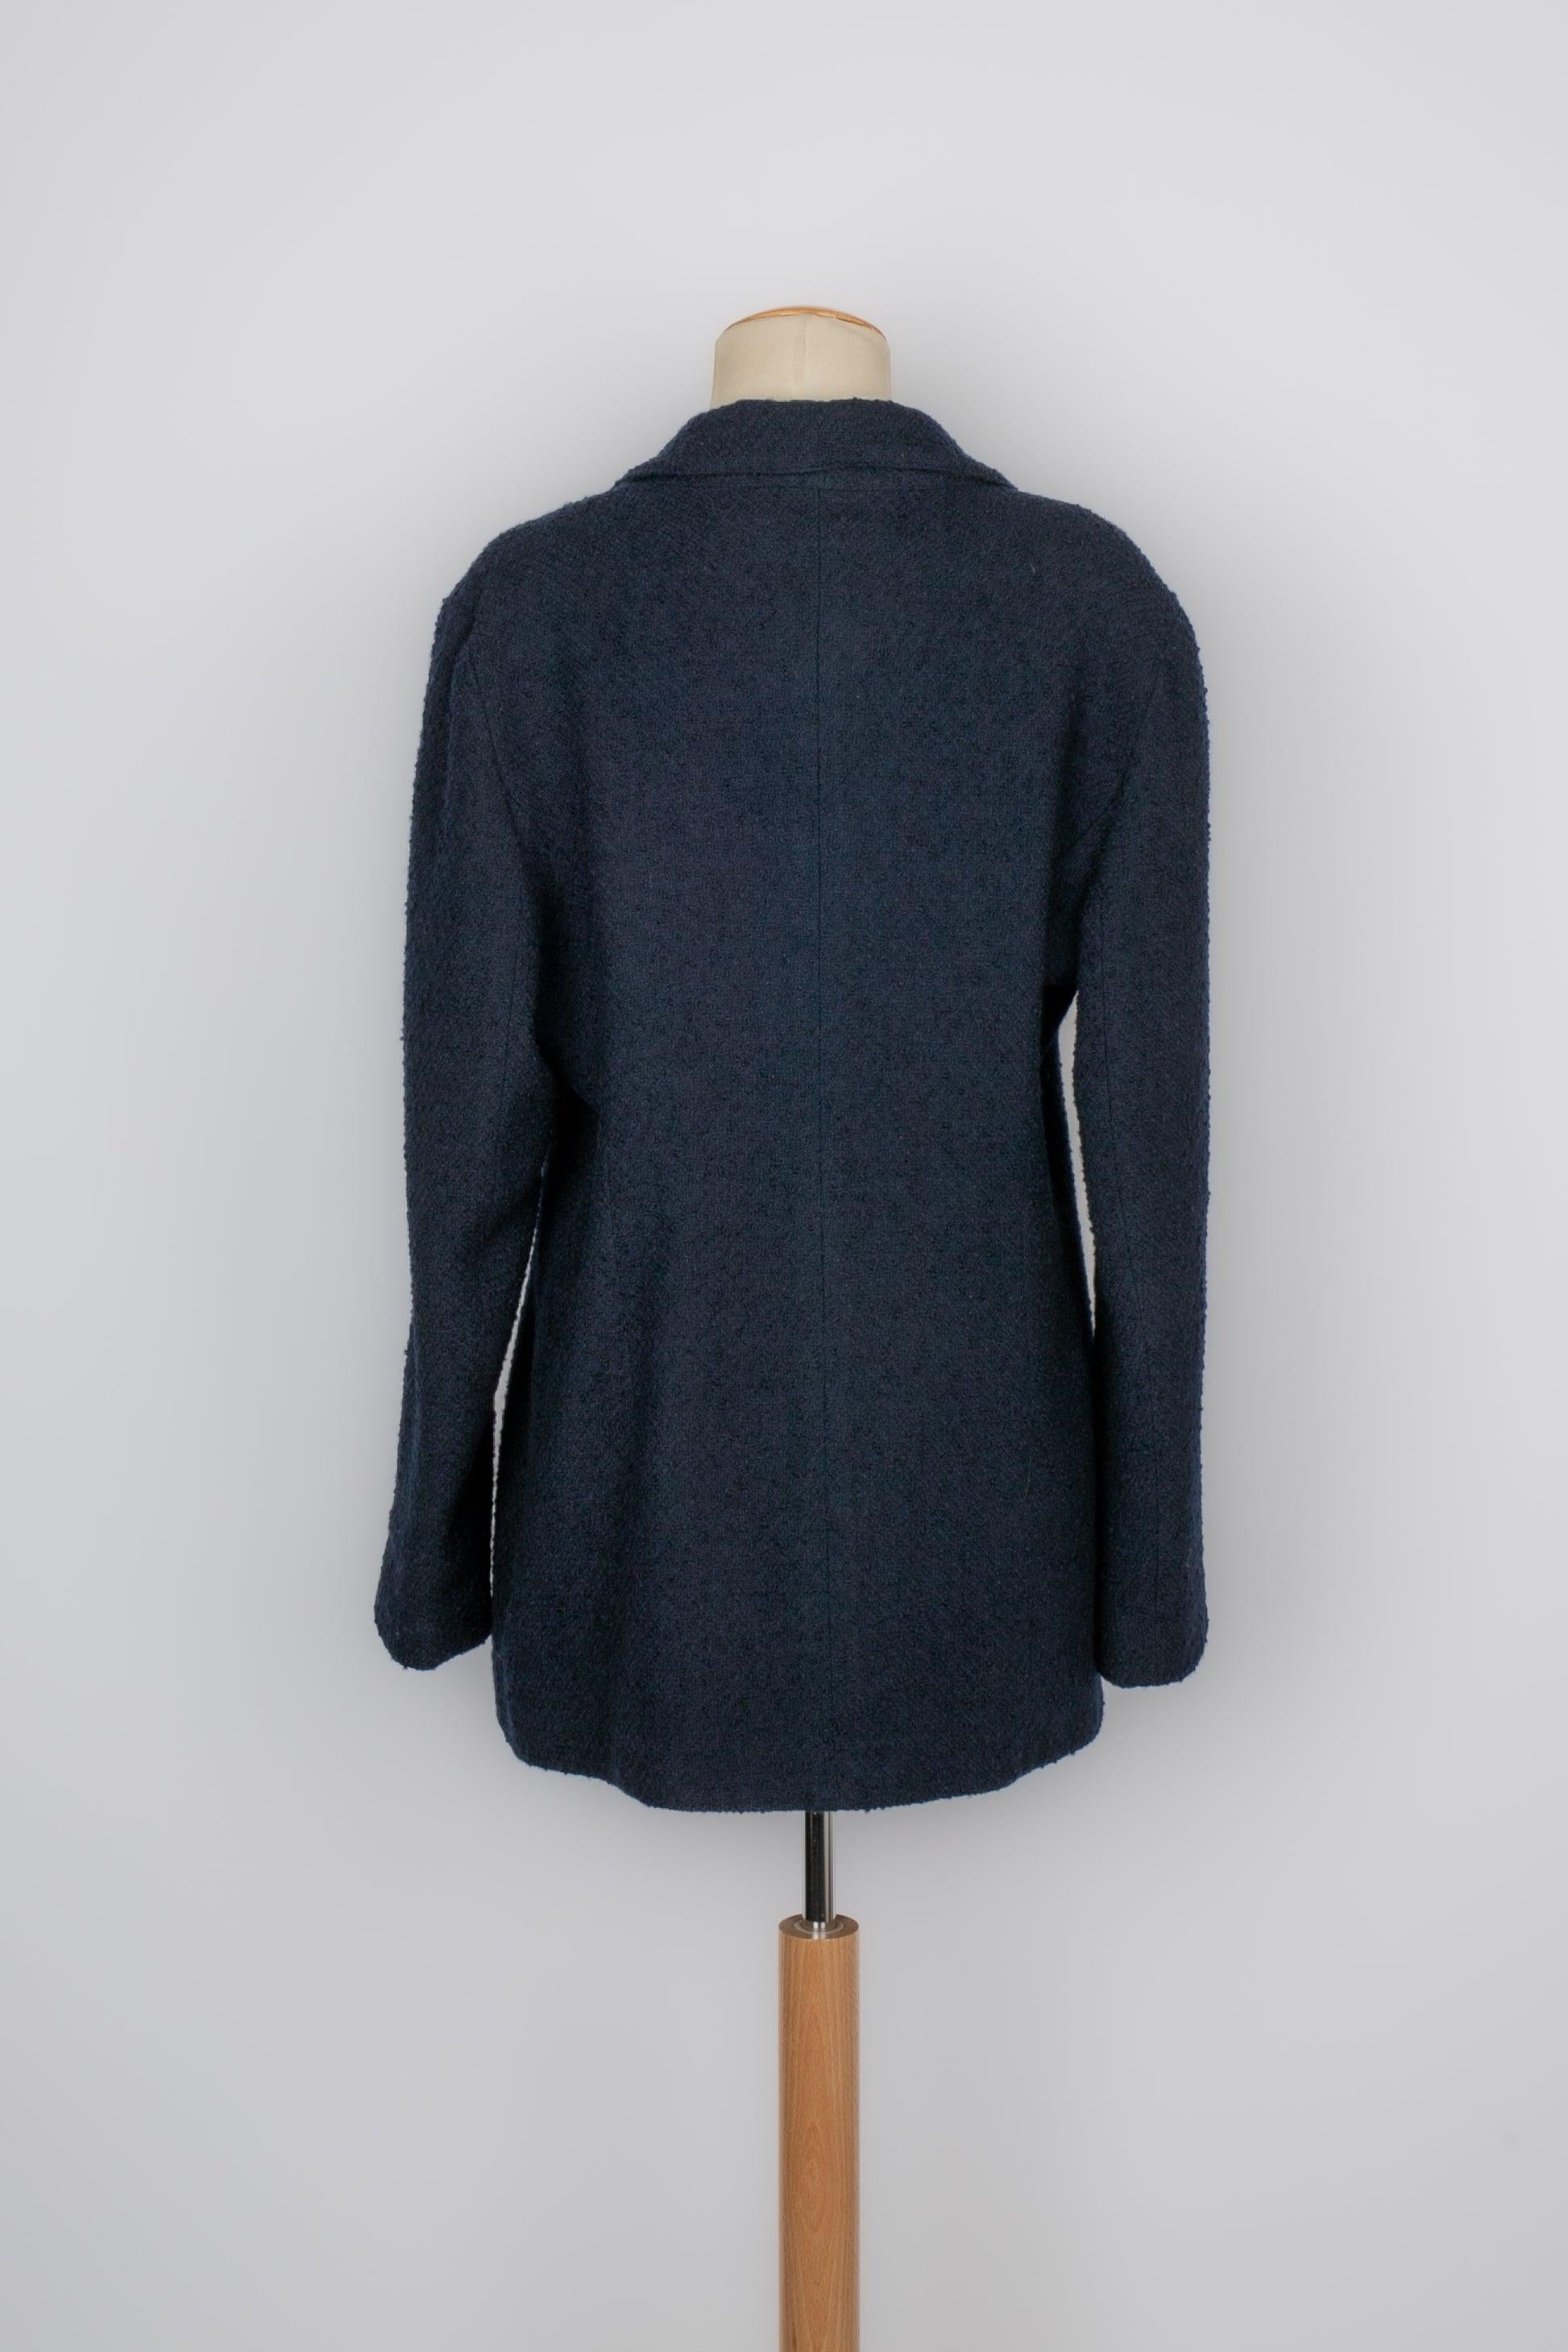 Azzaro Navy Blue Wool Jacket and Gold Metal Buttons In Good Condition For Sale In SAINT-OUEN-SUR-SEINE, FR